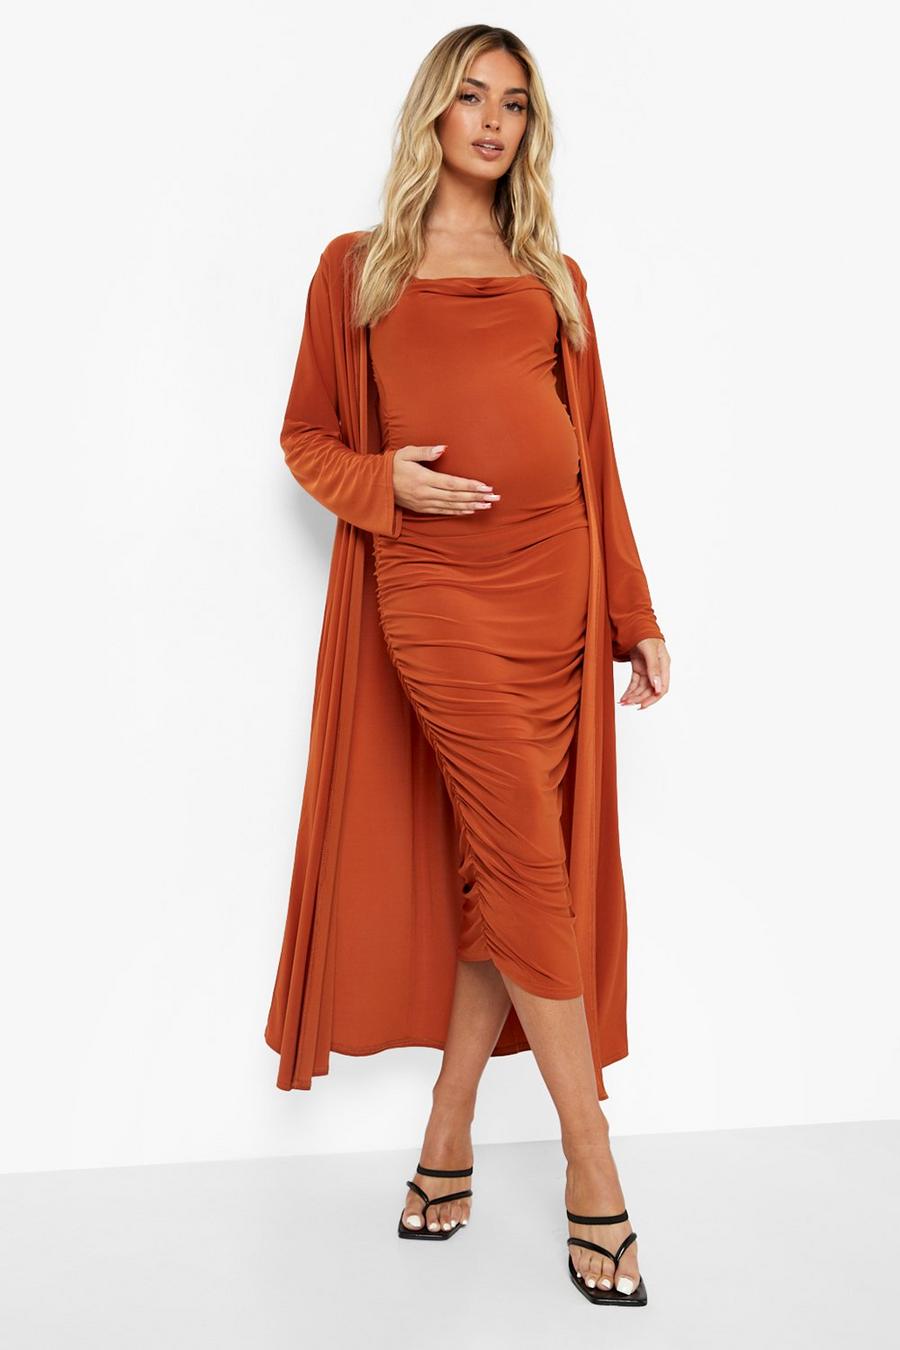 Rust orange Maternity Strappy Cowl Neck Dress And Duster Coat